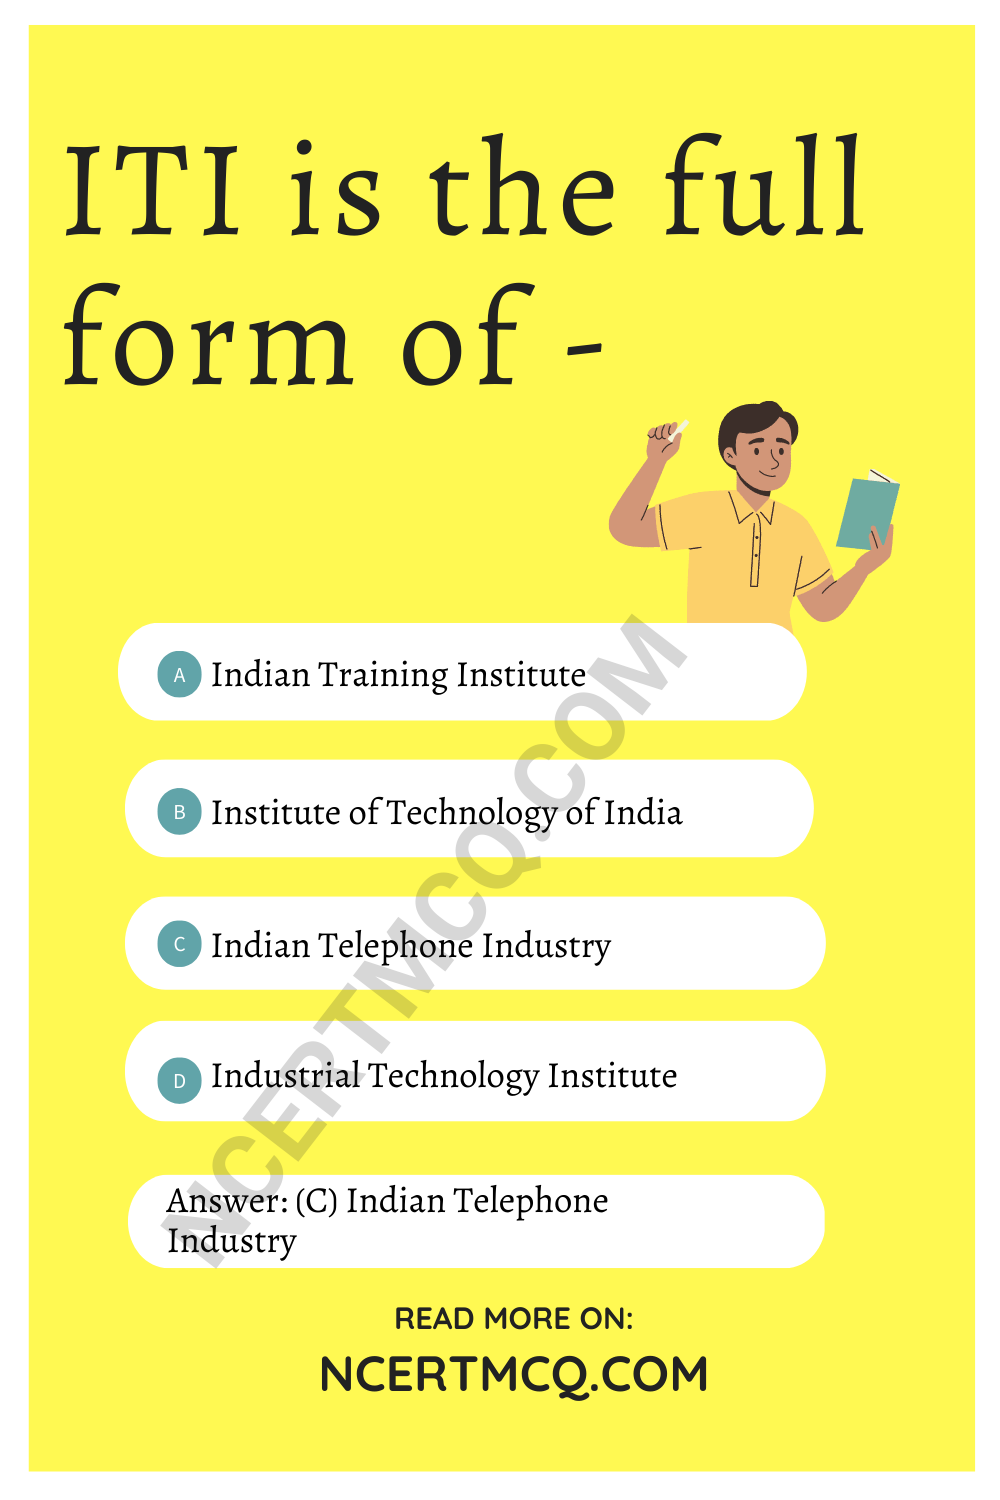 ITI is the full form of -